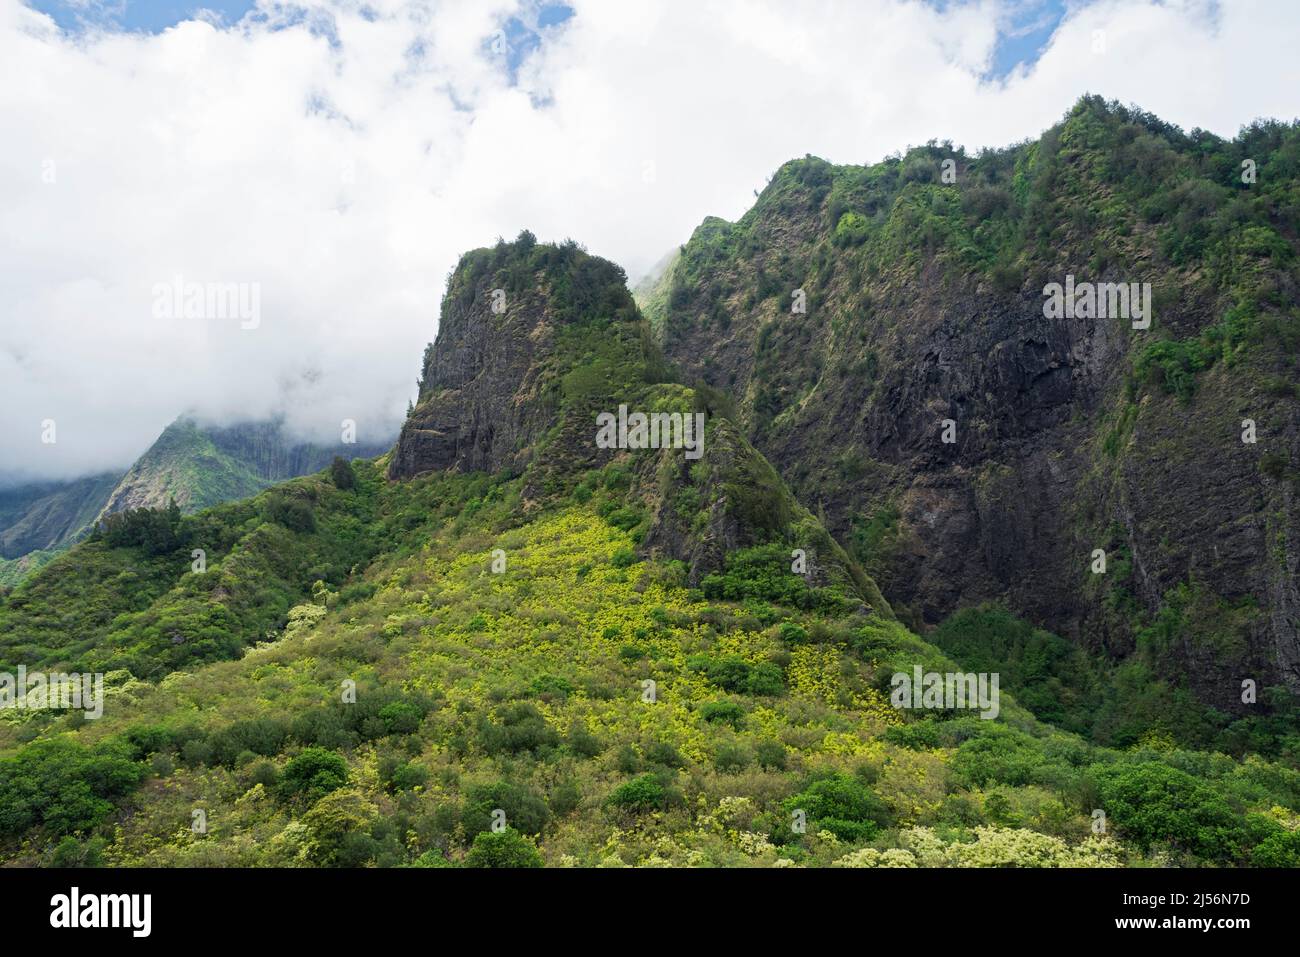 mountainous and lush iao valley state park amidst clouds in west maui hawaii Stock Photo